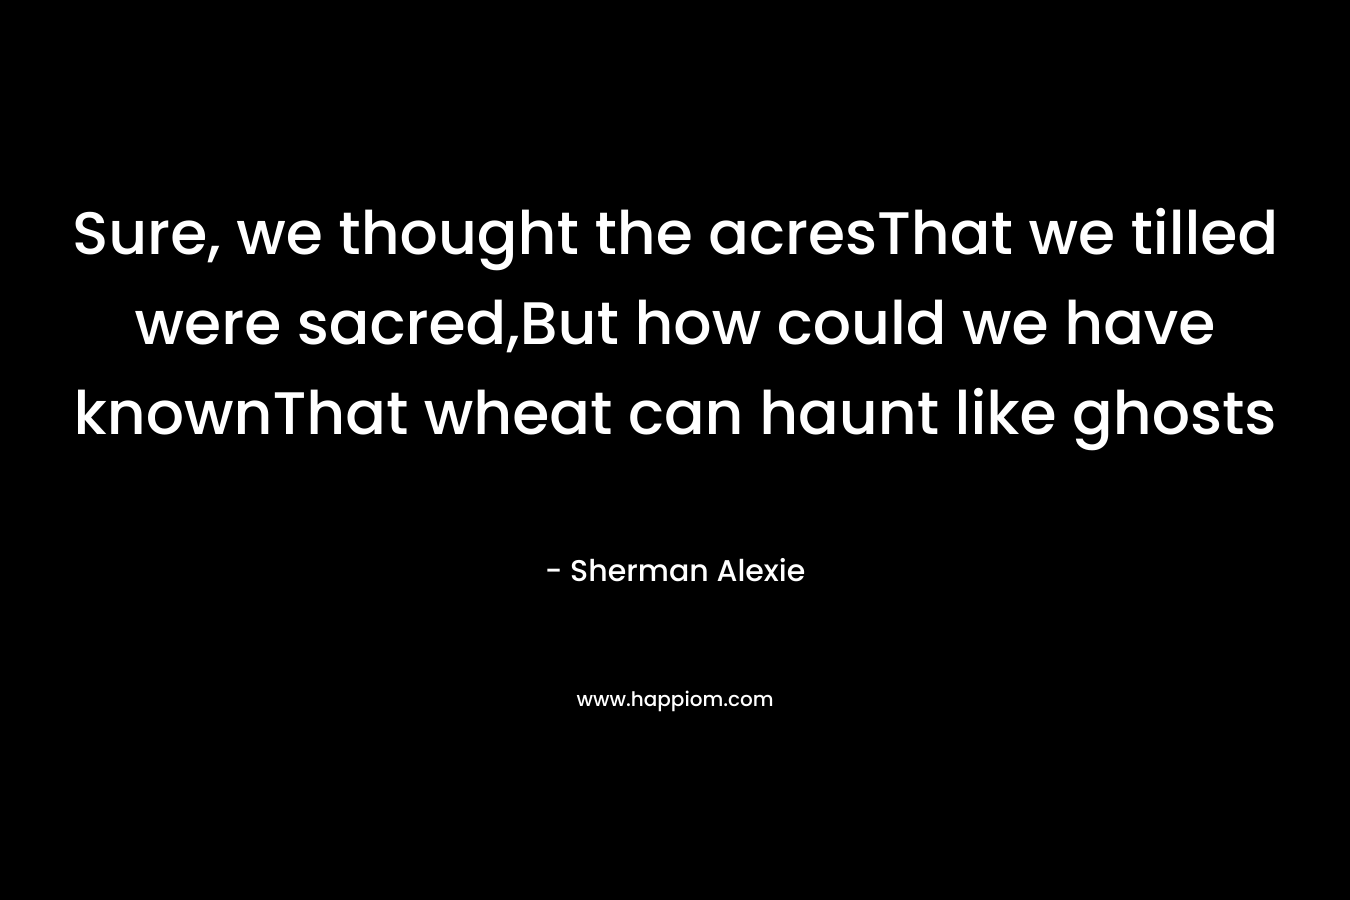 Sure, we thought the acresThat we tilled were sacred,But how could we have knownThat wheat can haunt like ghosts